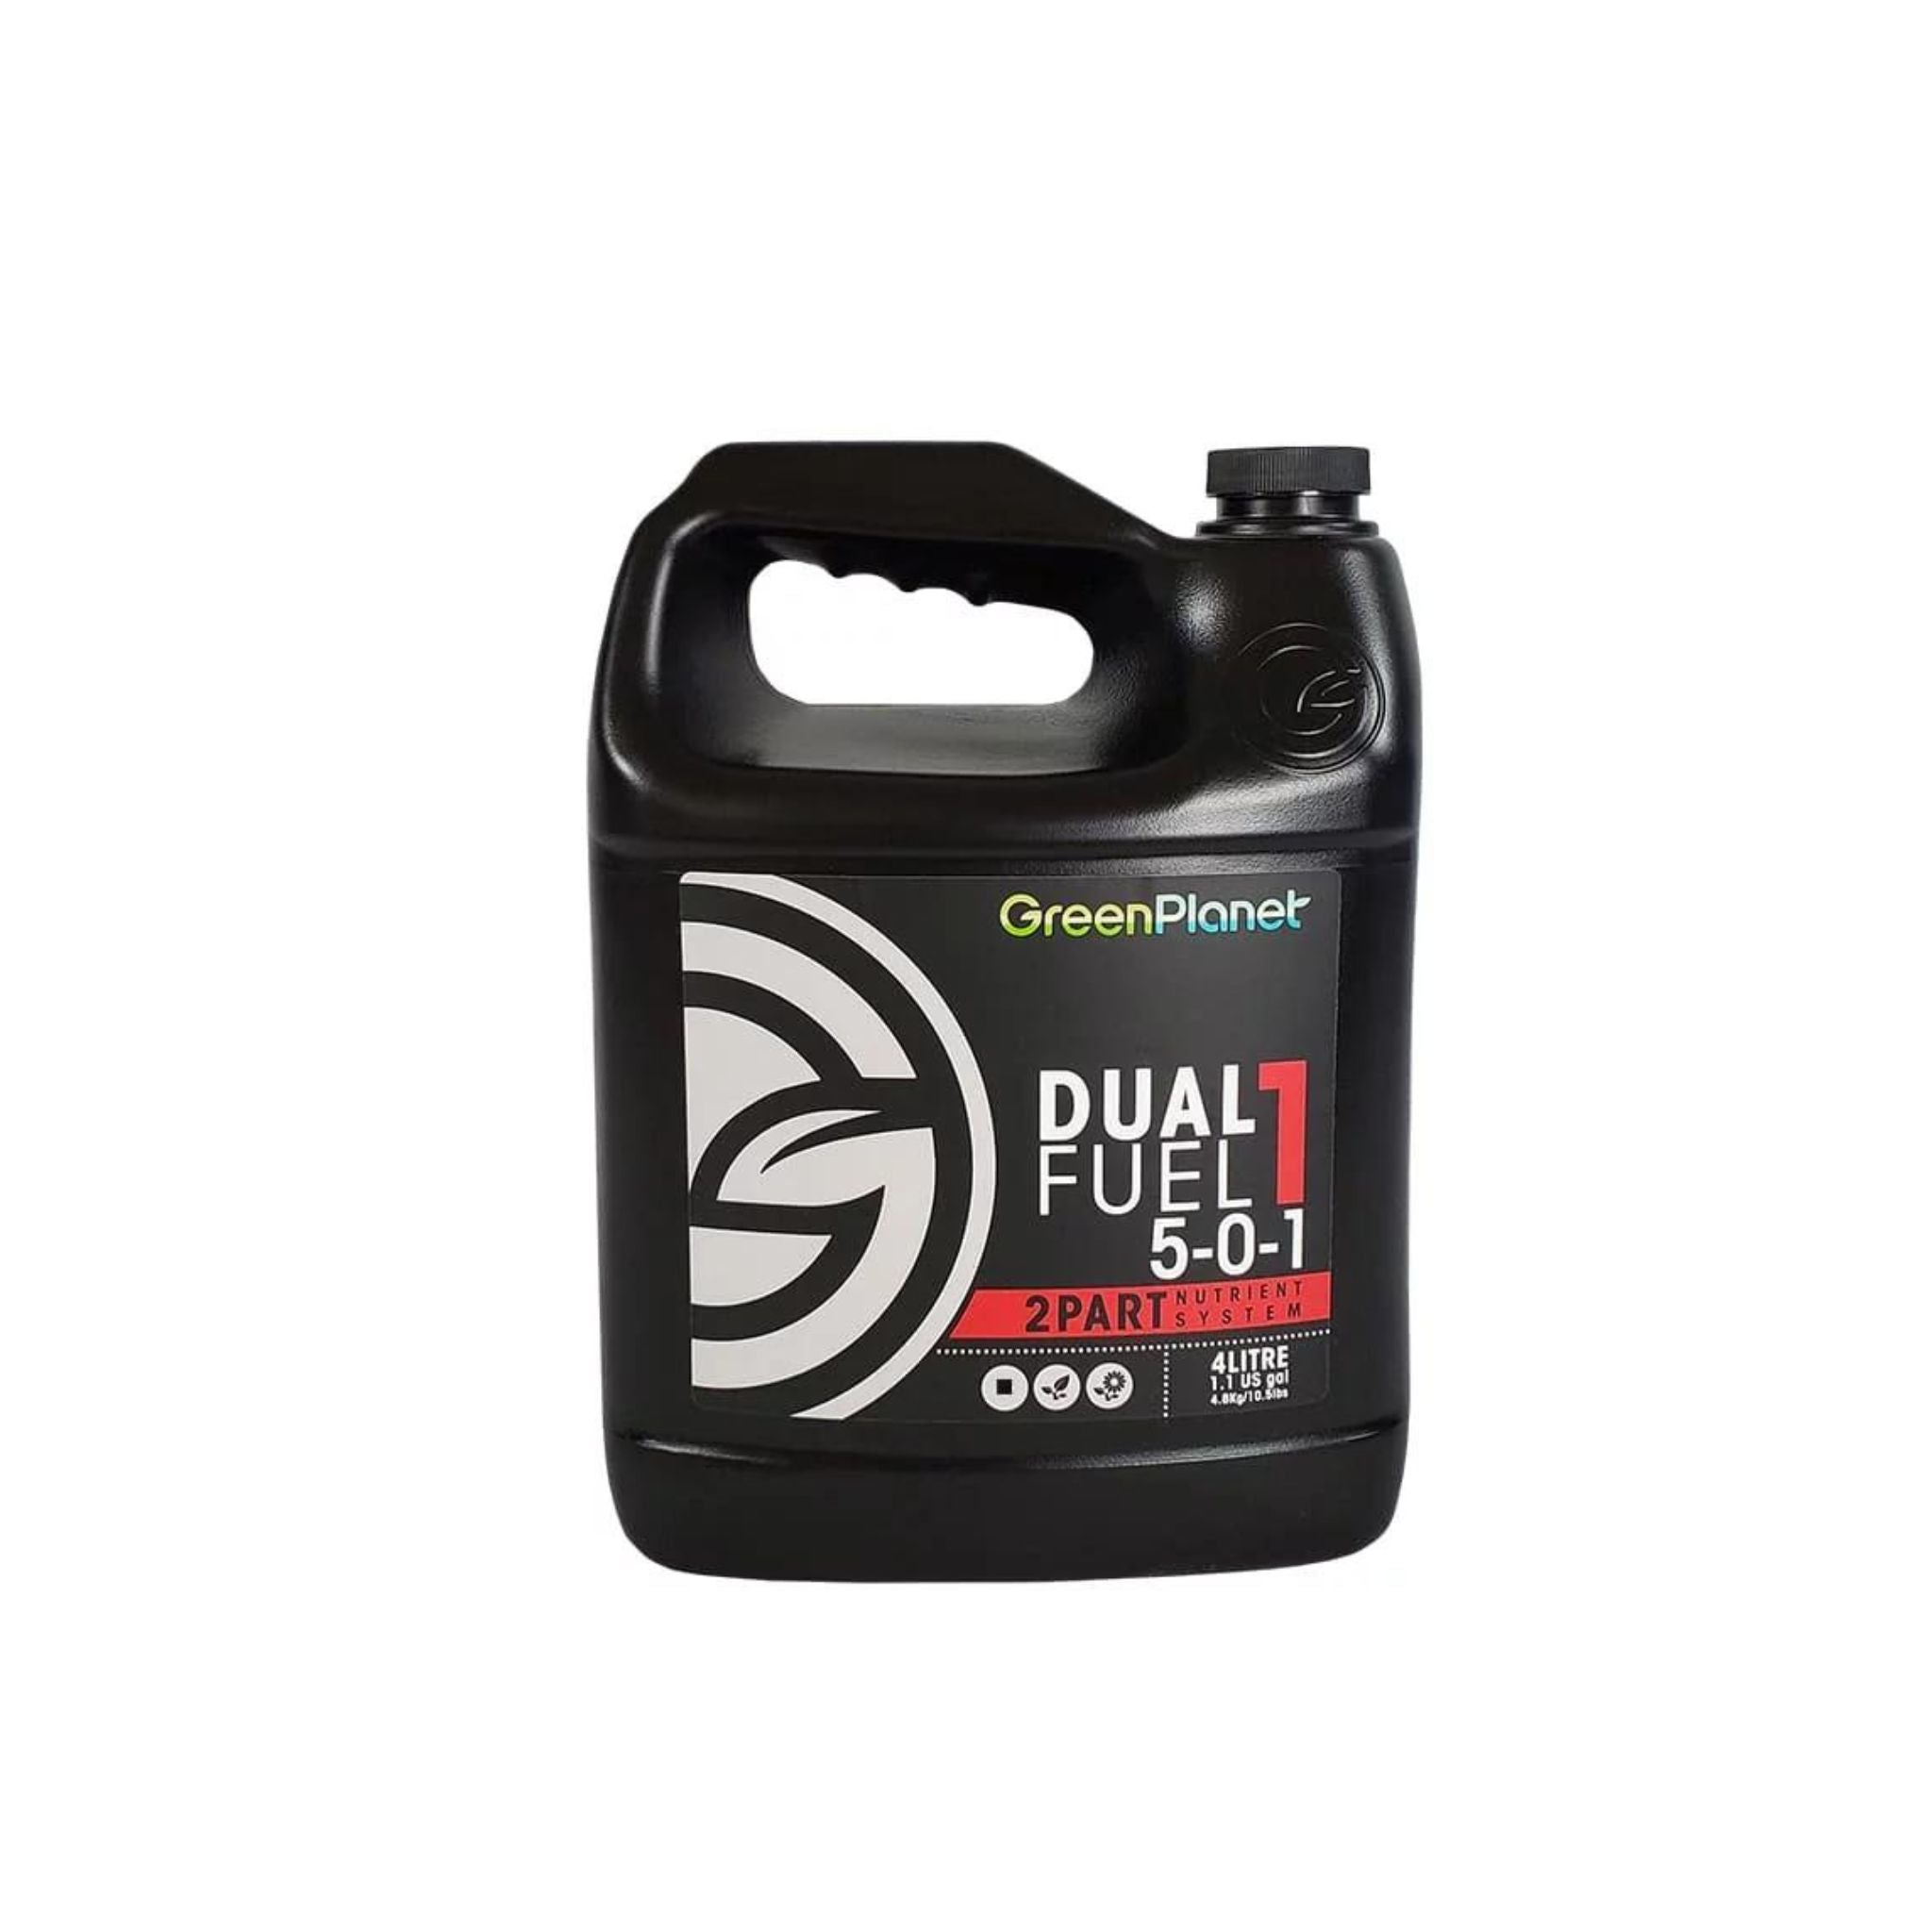 Green Planet Dual Fuel 2 Part Feed